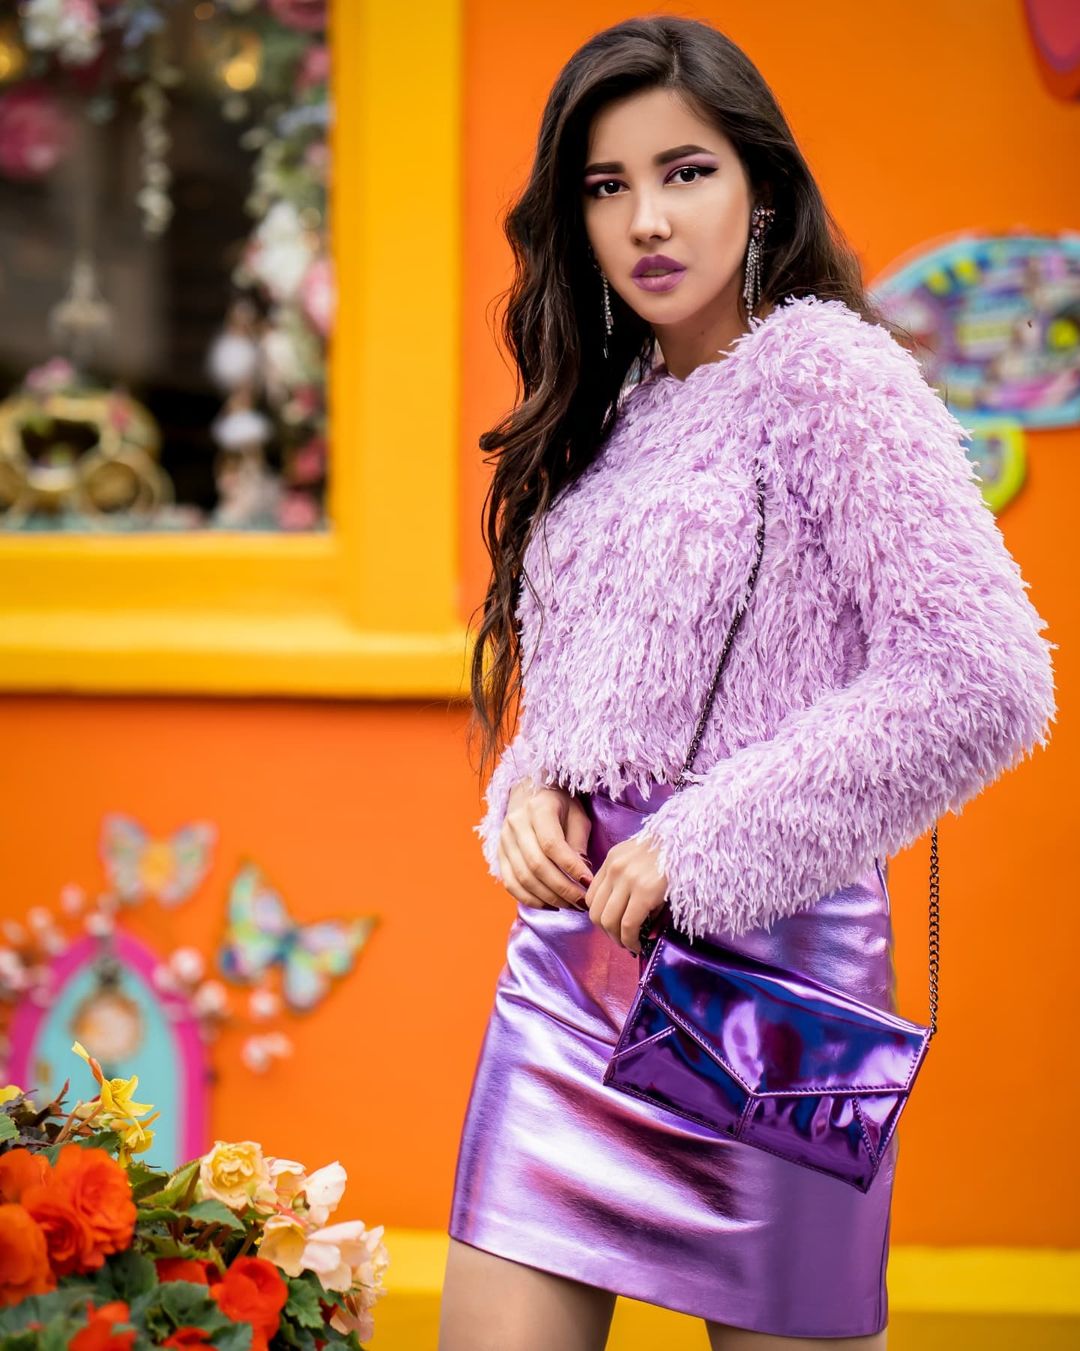 Purple Skirt Outfits 25 Ways To Style A Purple Skirt